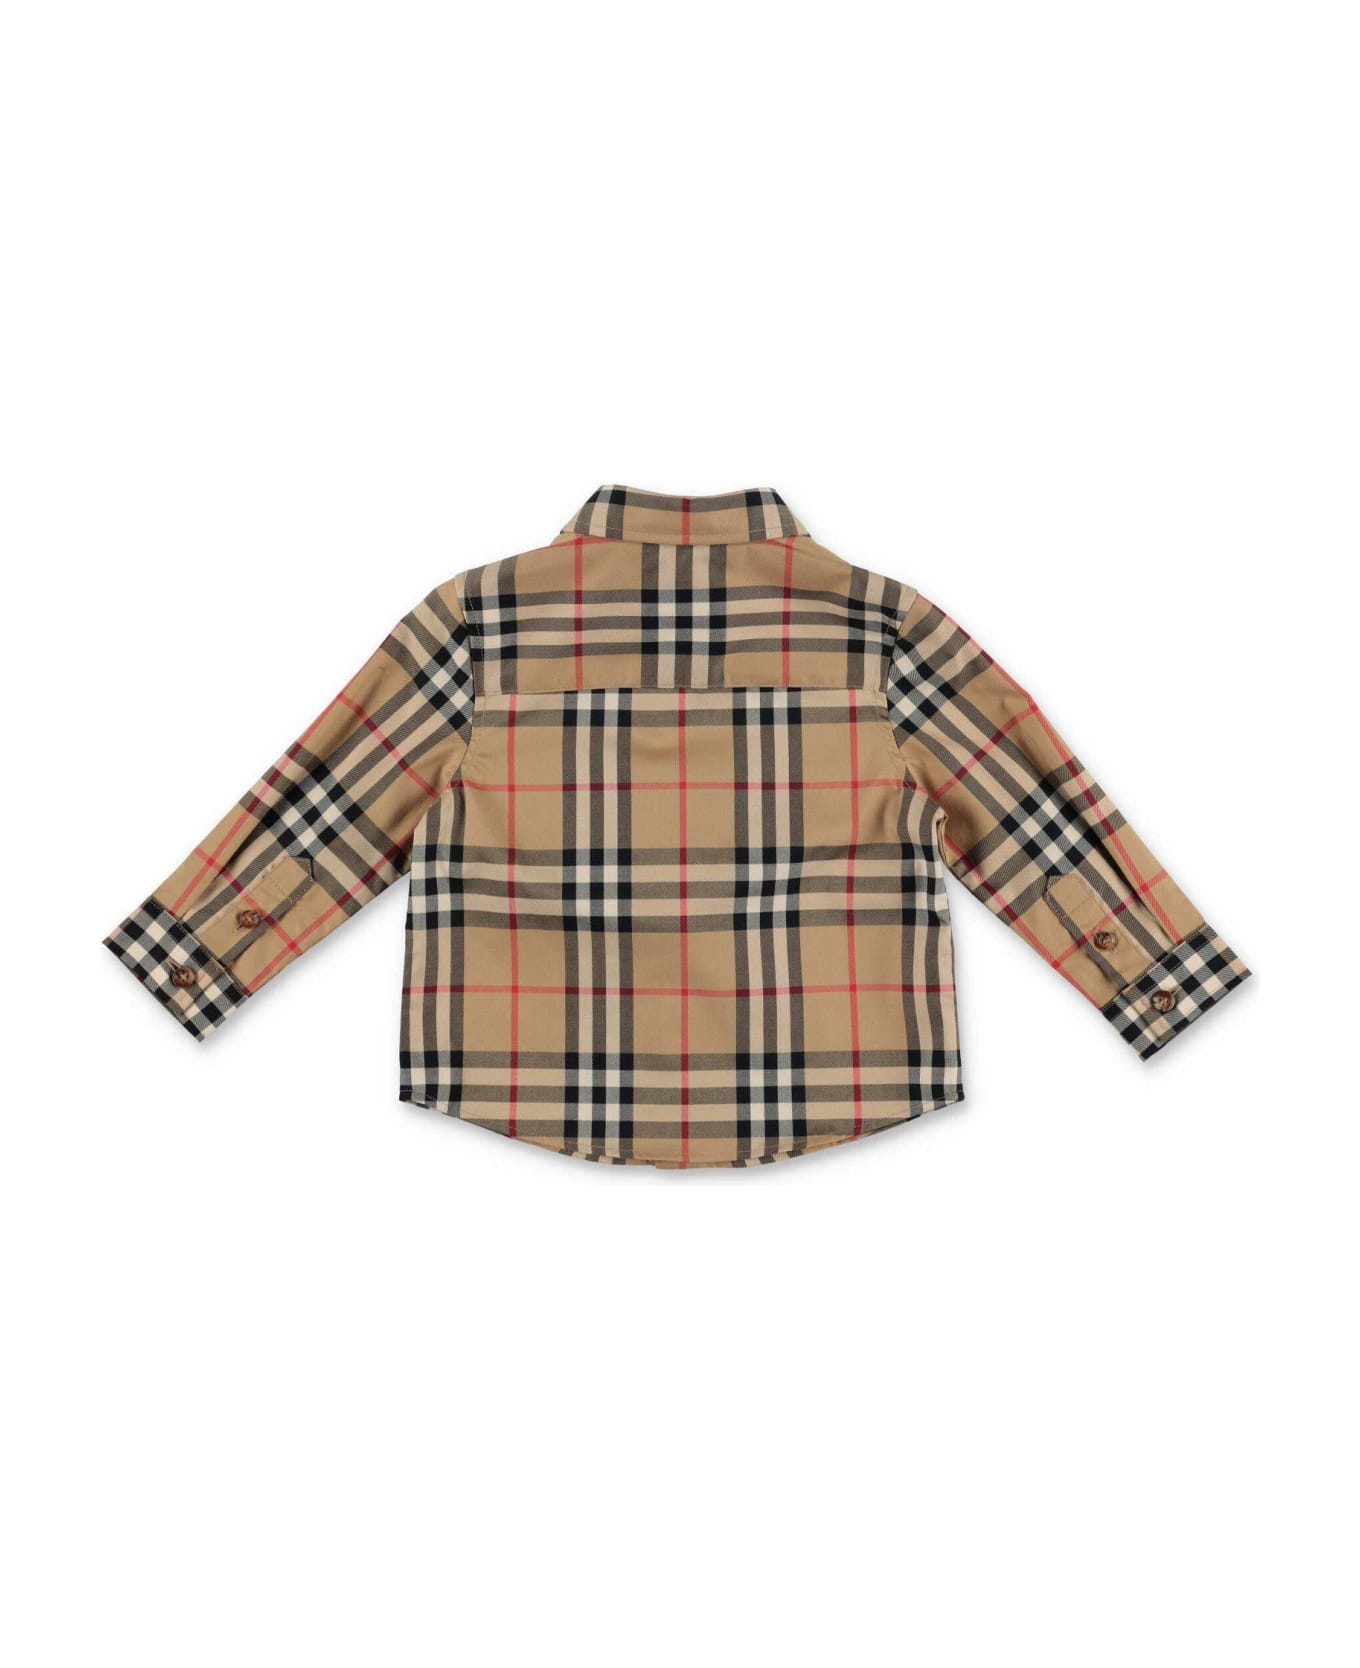 Burberry Checked Long-sleeved Shirt - Archive beige ip chk